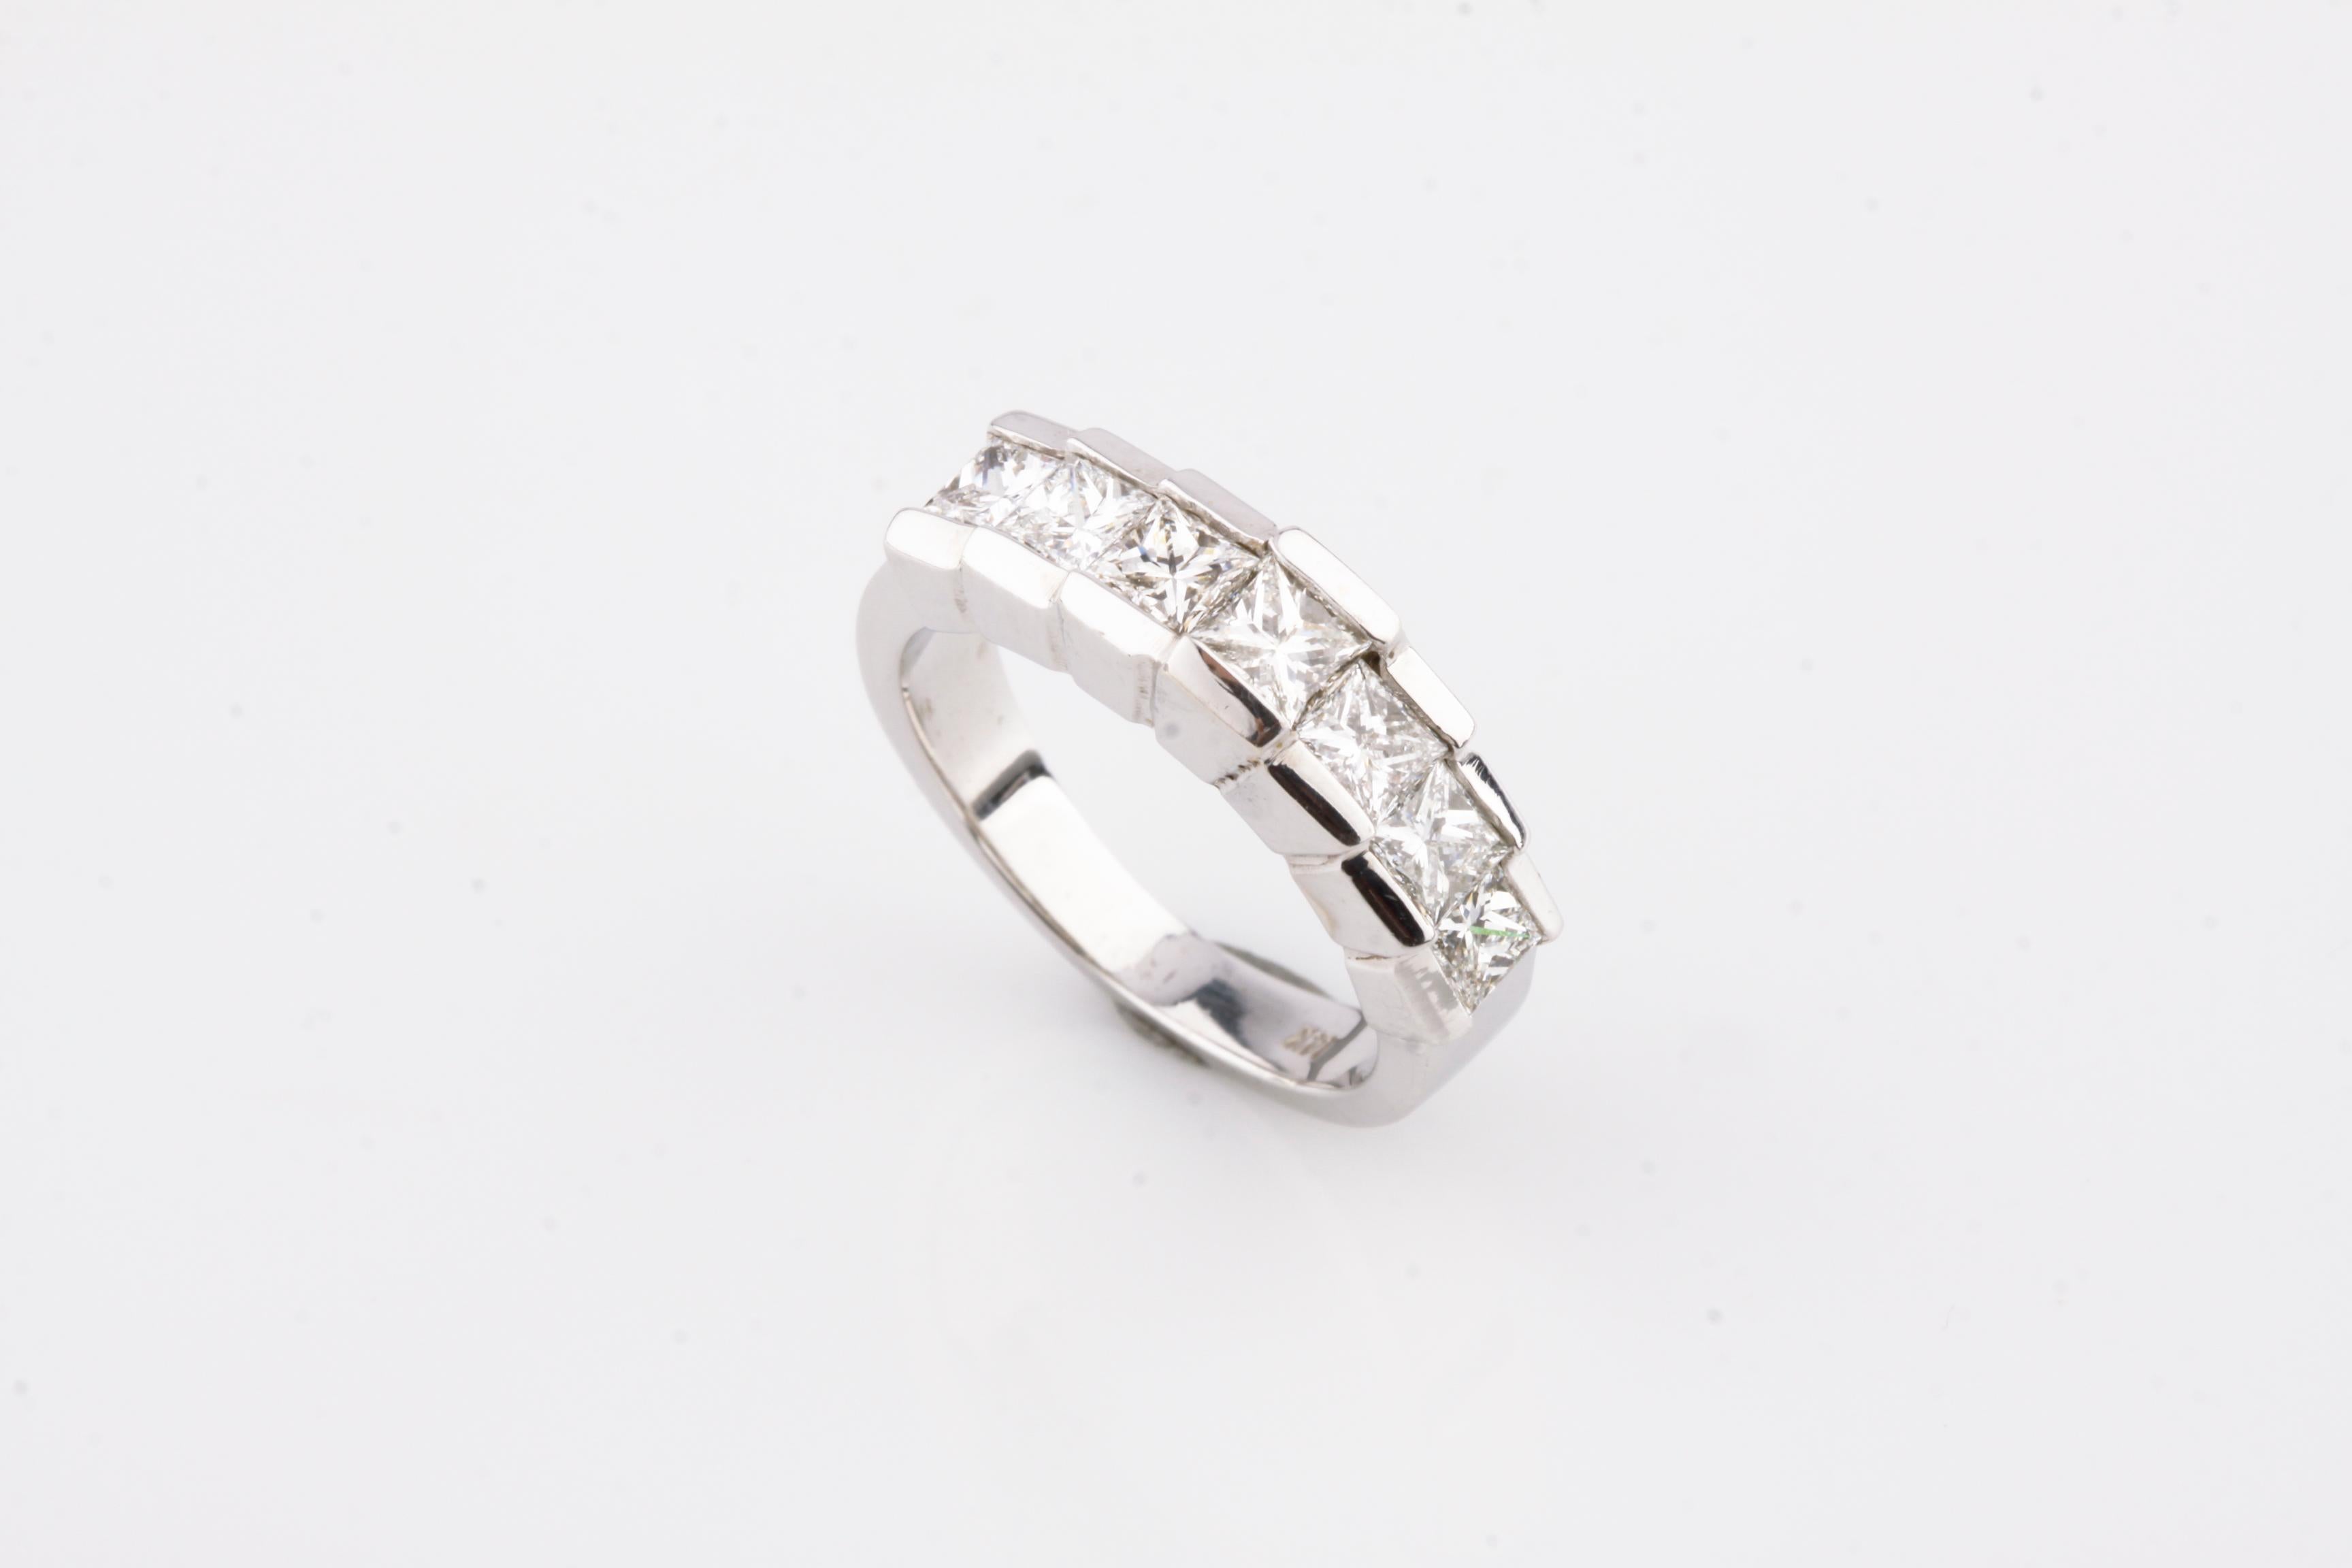 1.75 Carat Princess Cut Diamond Ring Band 14 Karat White Gold In Good Condition For Sale In Sherman Oaks, CA